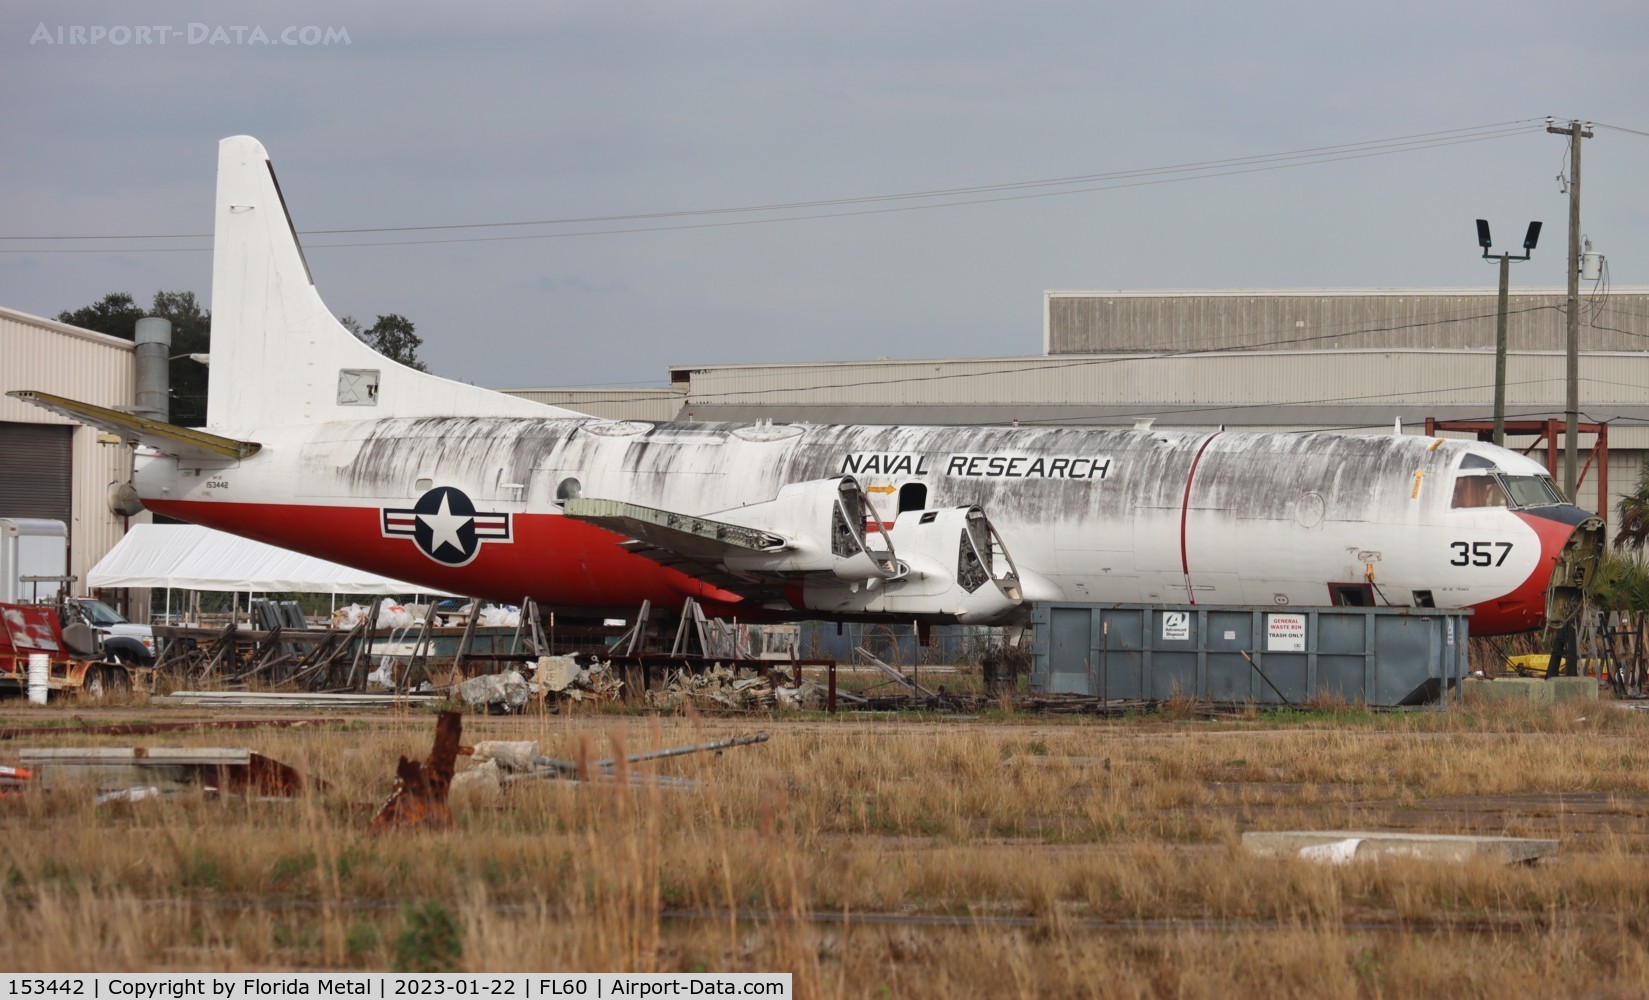 153442, Lockheed NP-3D Orion C/N 185-5239, NP-3D zx